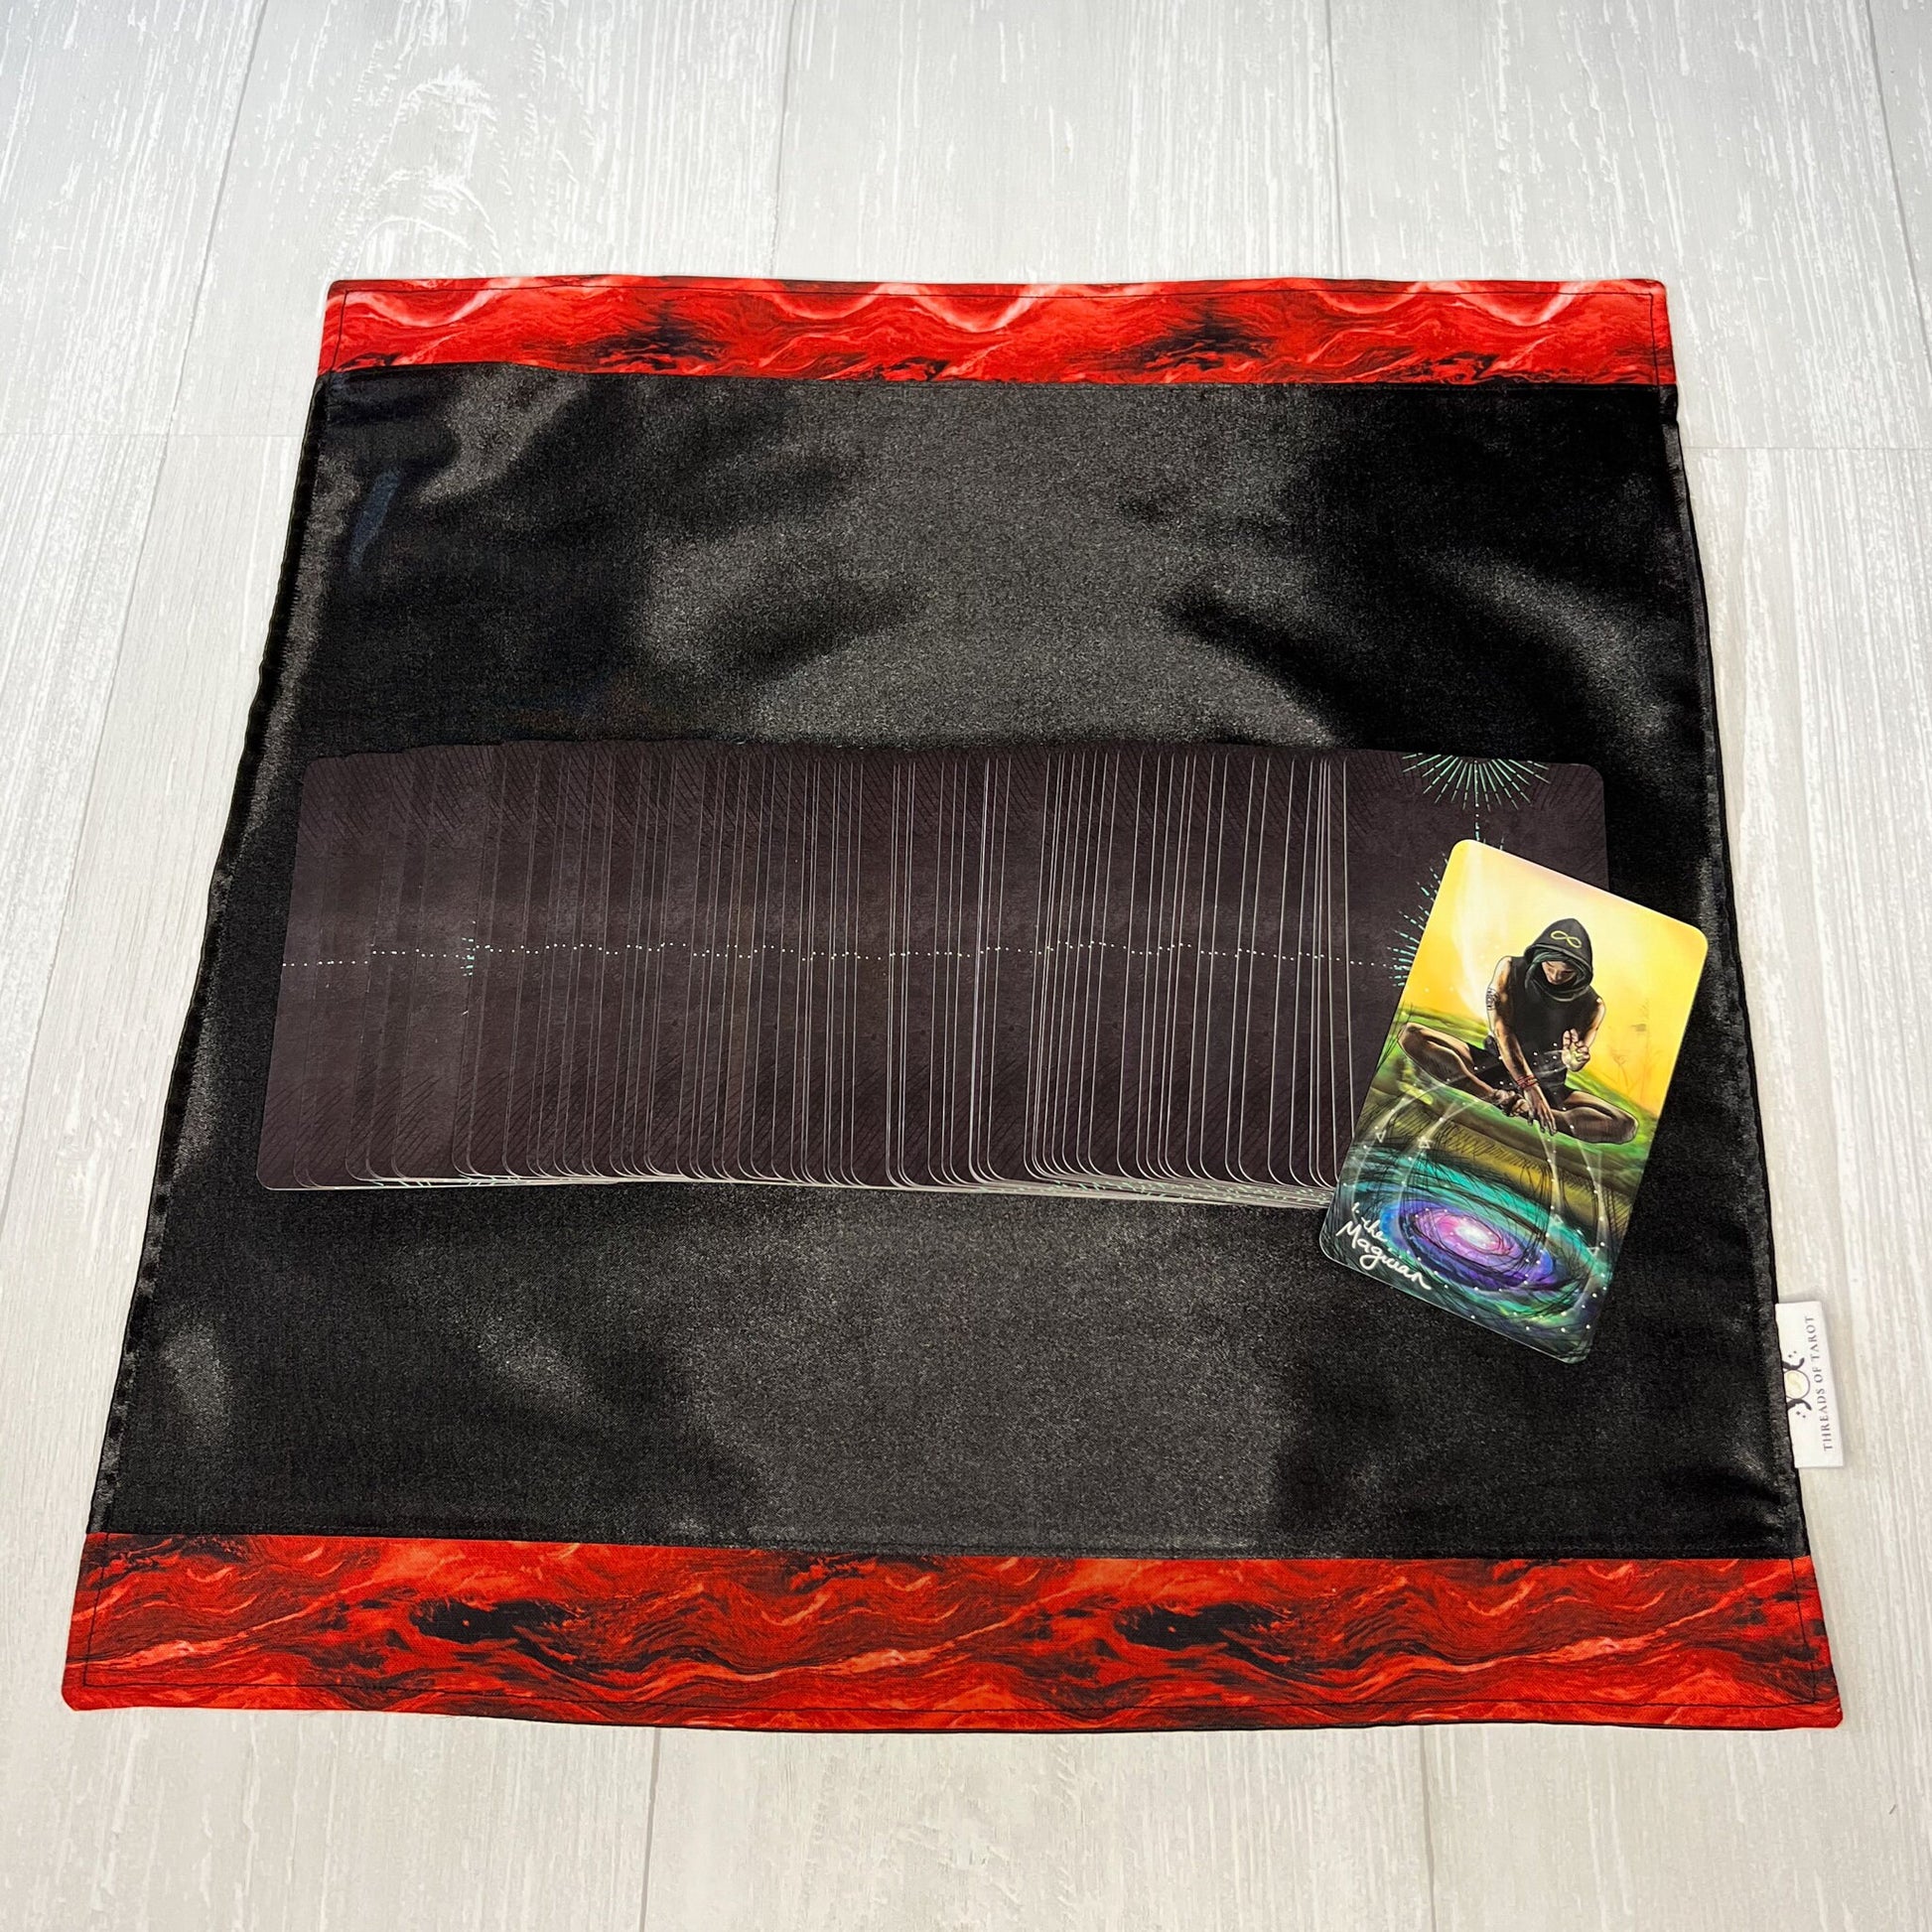 Black Altar Cloth with Red Border Detail, Ritual Cloth, Rune Casting, Tarot Reading Cloth & Supplies, Witchy Gift Supplies, Divination Tools